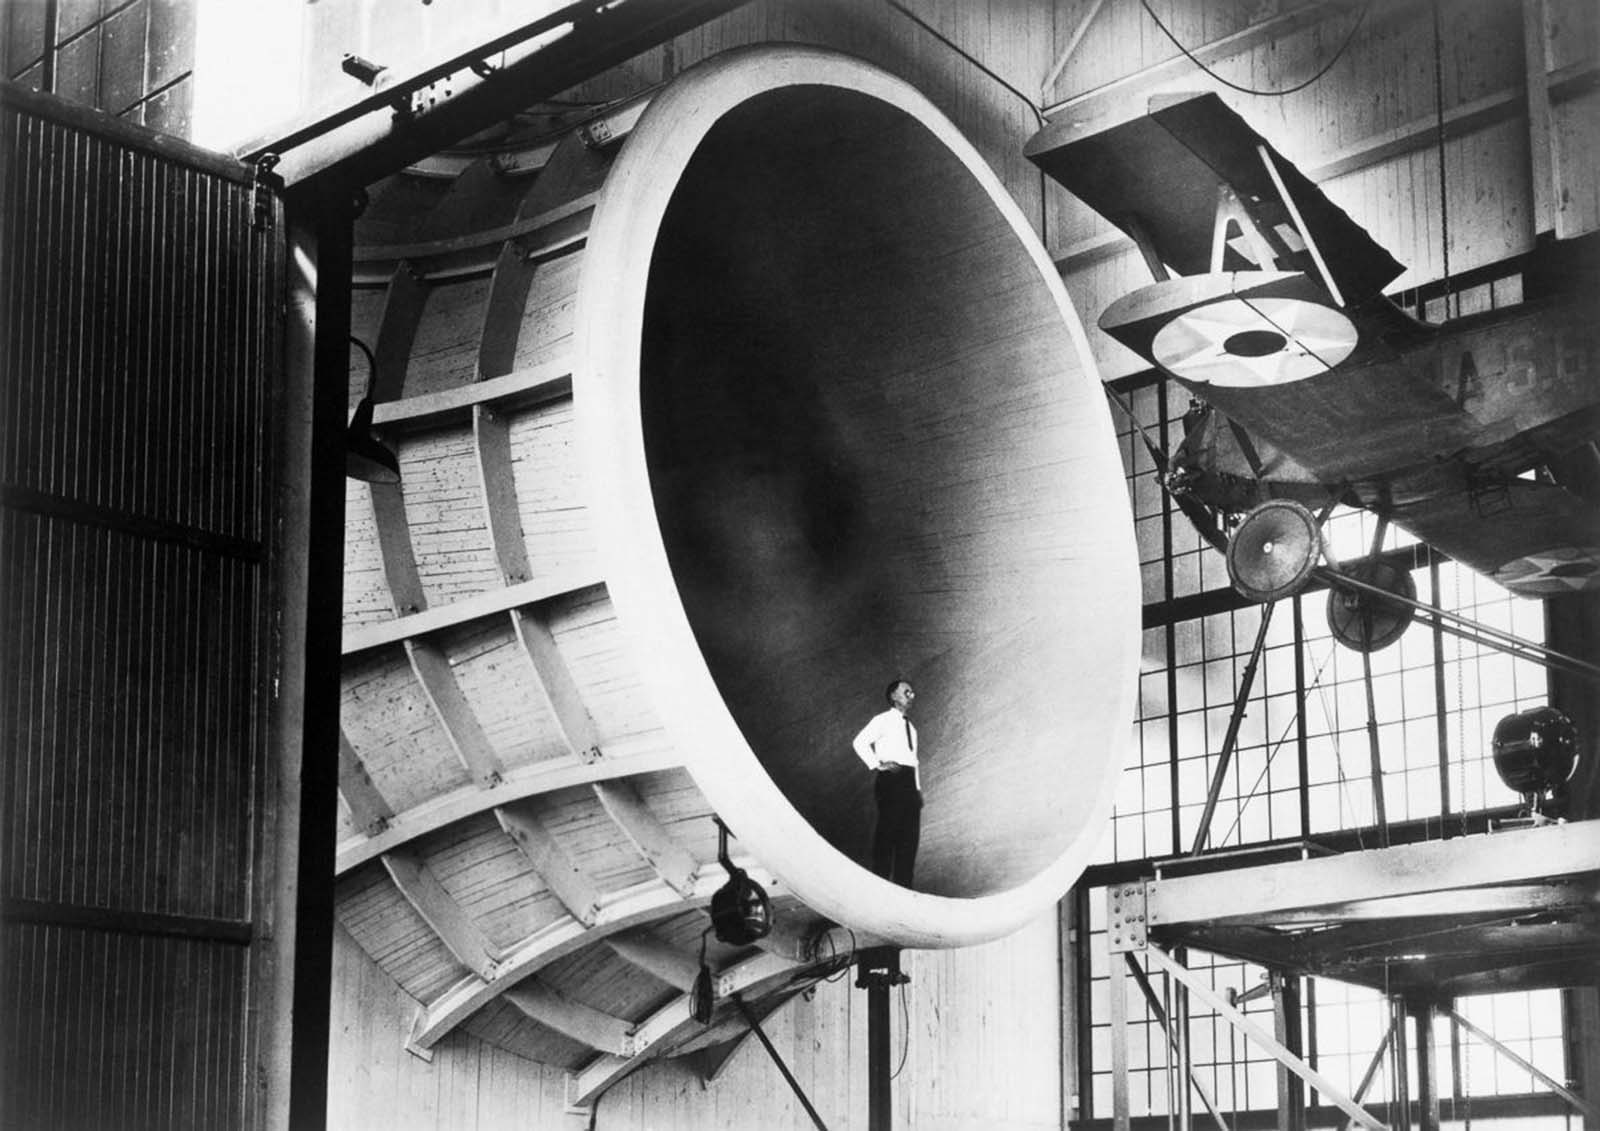 A Langley researcher observes a Sperry M-1 Messenger, the first full-scale airplane tested in the Propeller Research Tunnel, 1927.